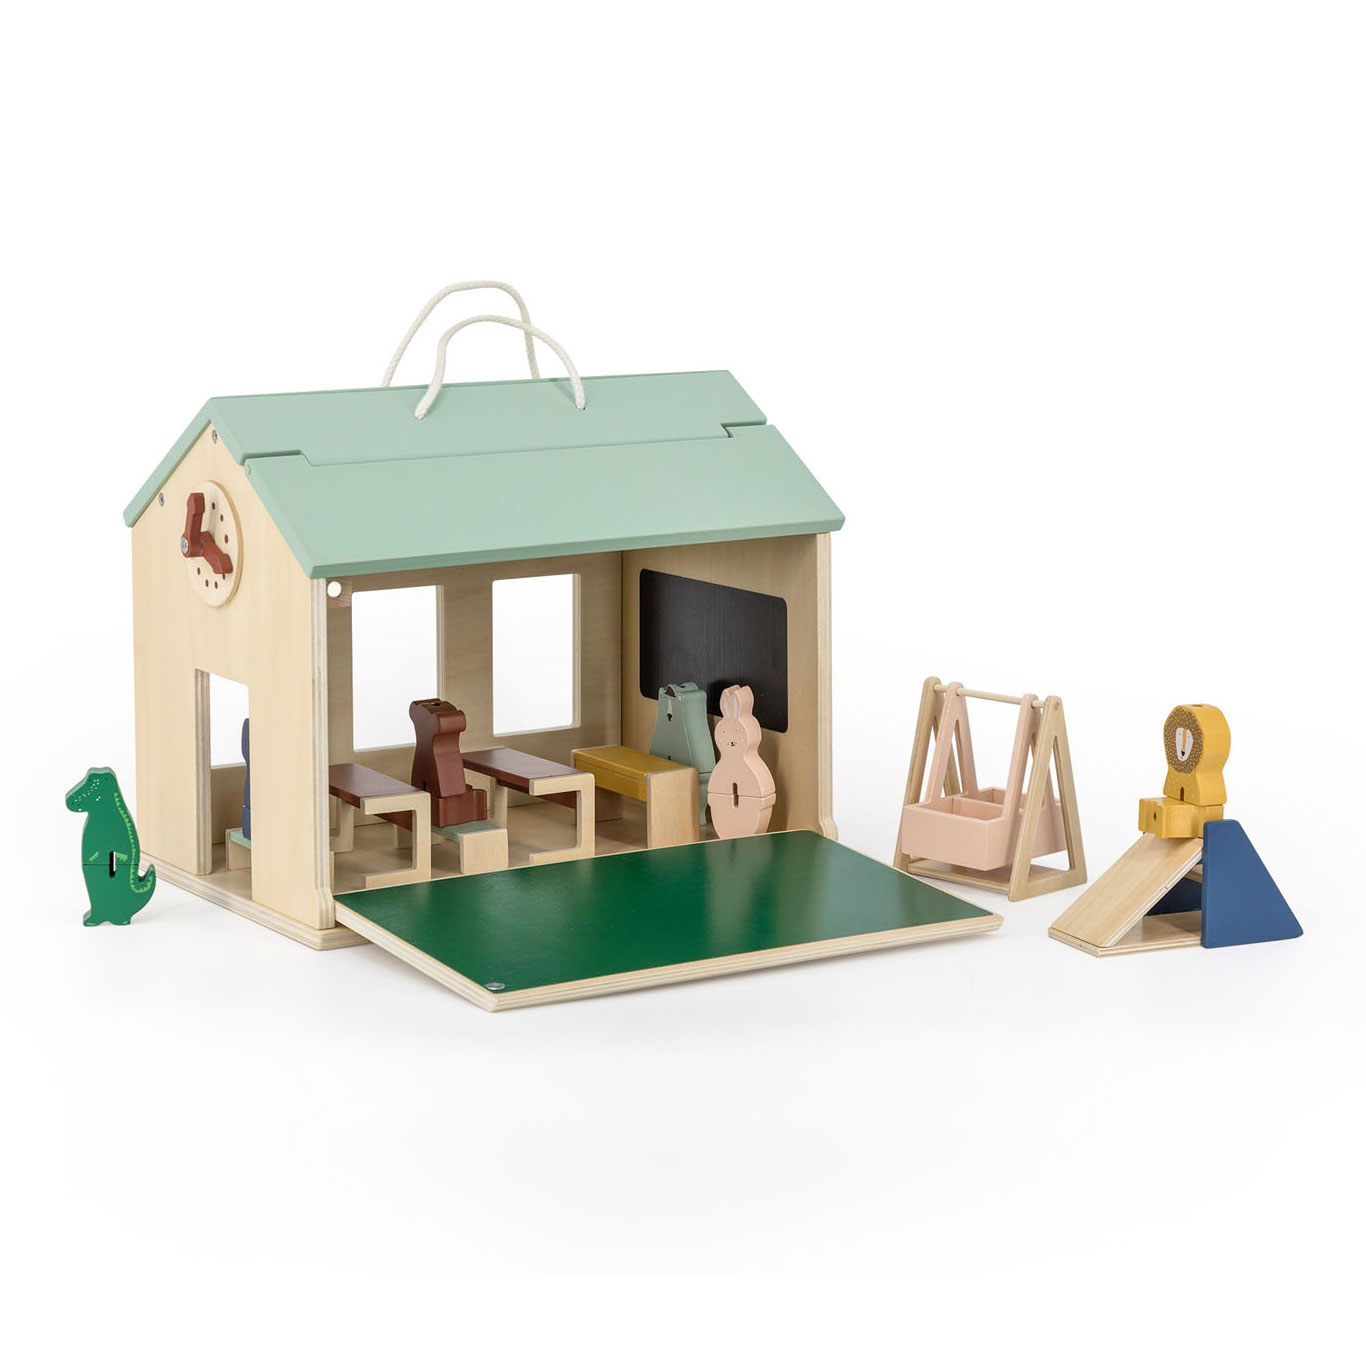 Trixie Wooden Dollhouse with Accessories